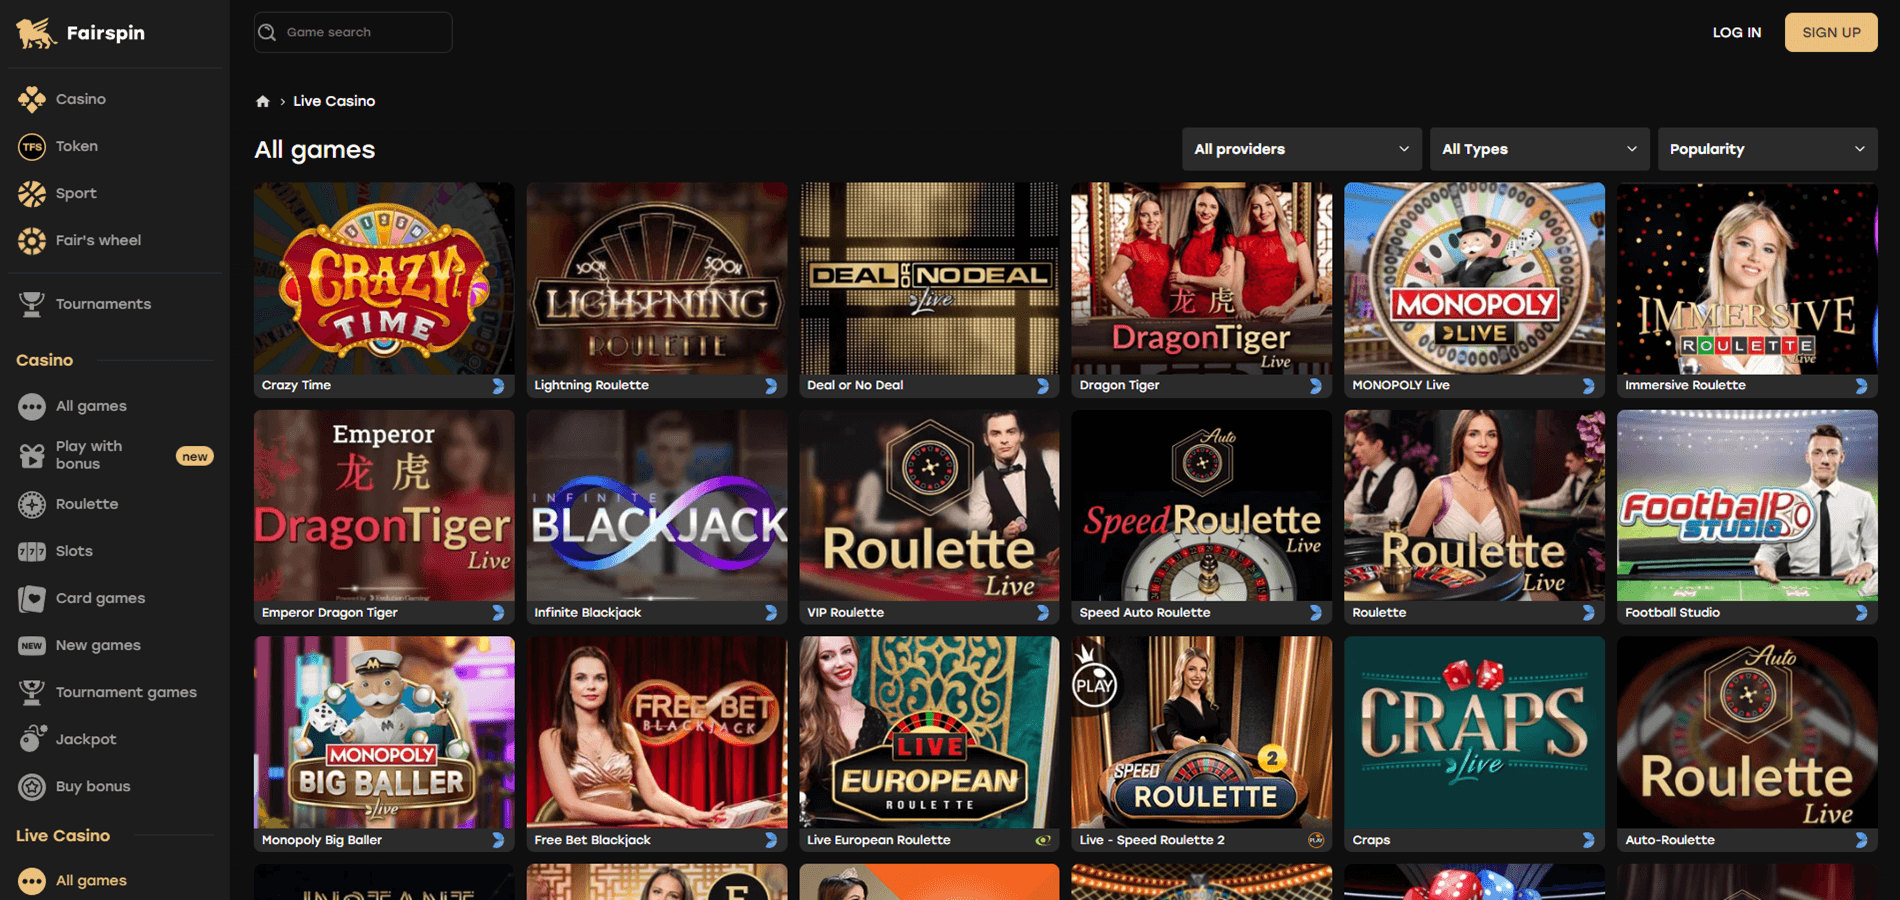 Amusnet Interactive Introduces New Live Roulette Casino Product